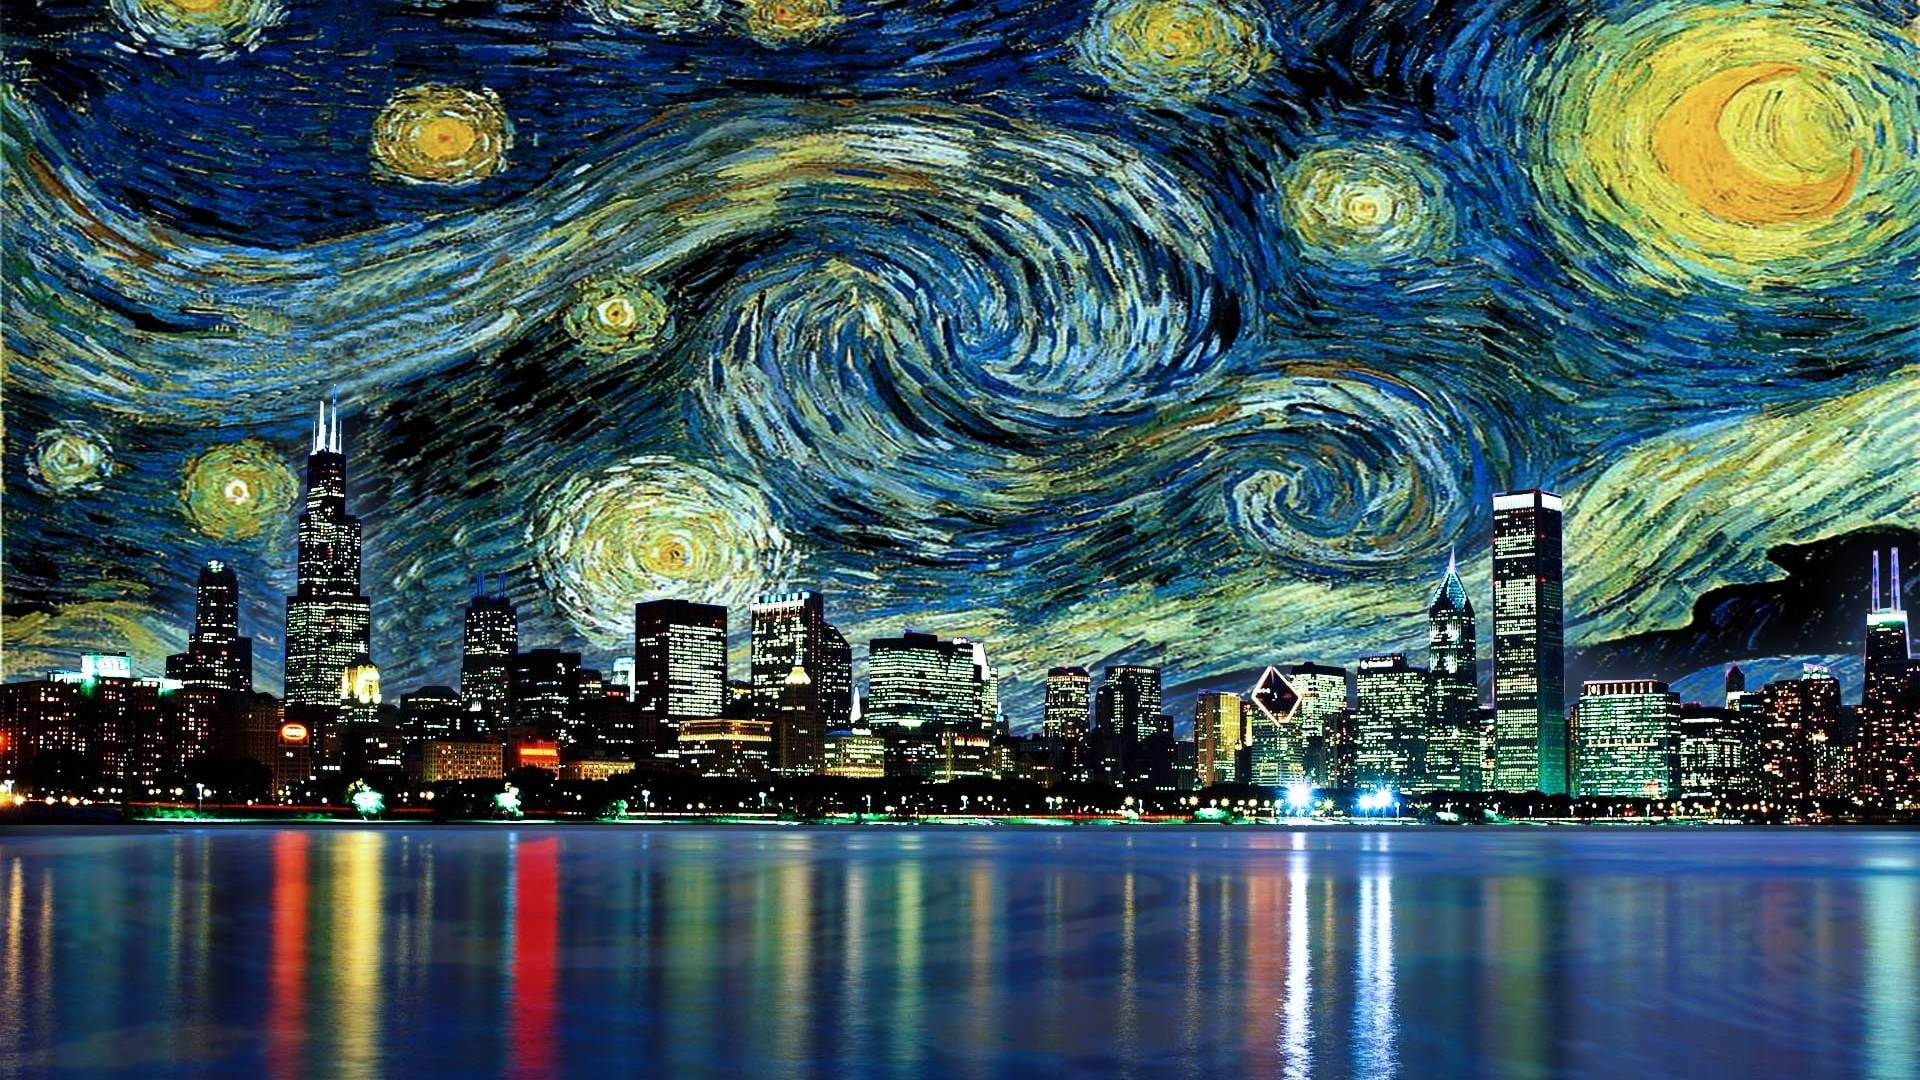 cityscape and starry night painting, A Starry Night by Vincent Van Gogh